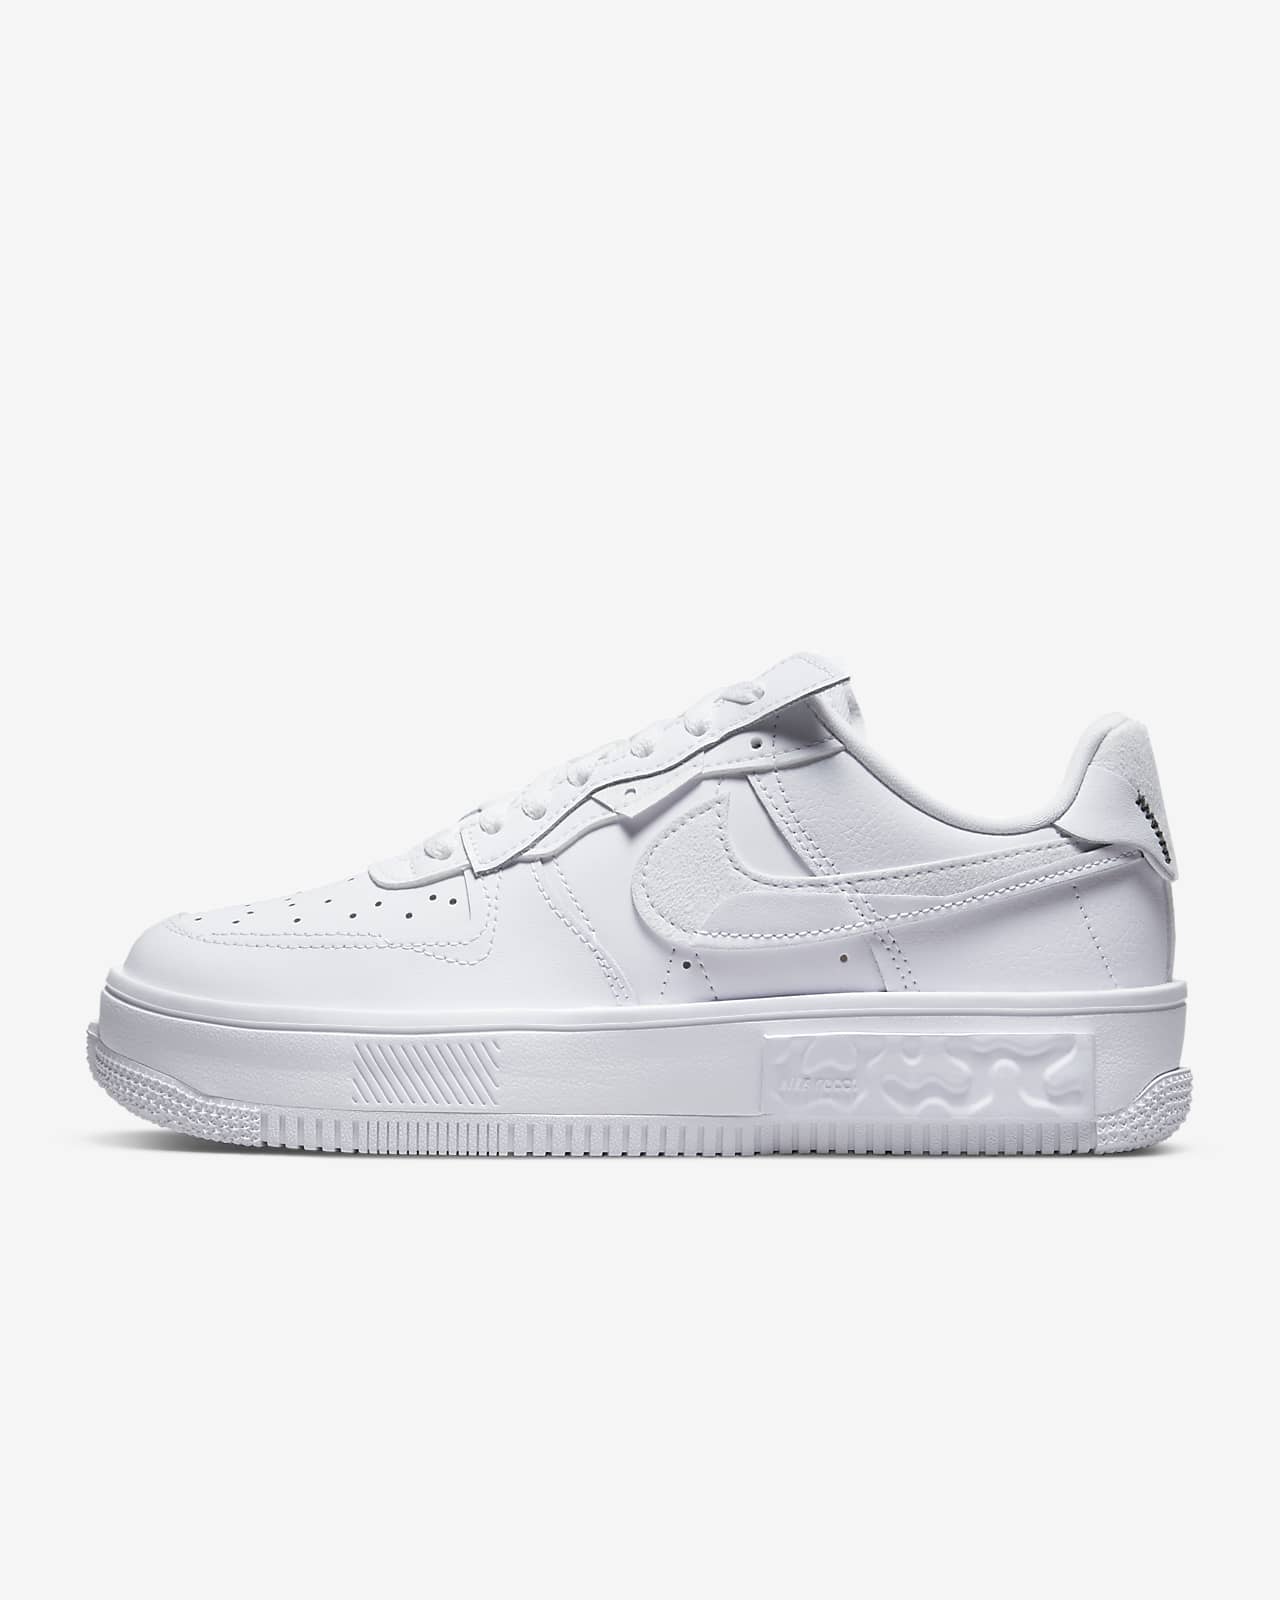 Chaussure Nike Air Force 1 Fontaka pour Femme